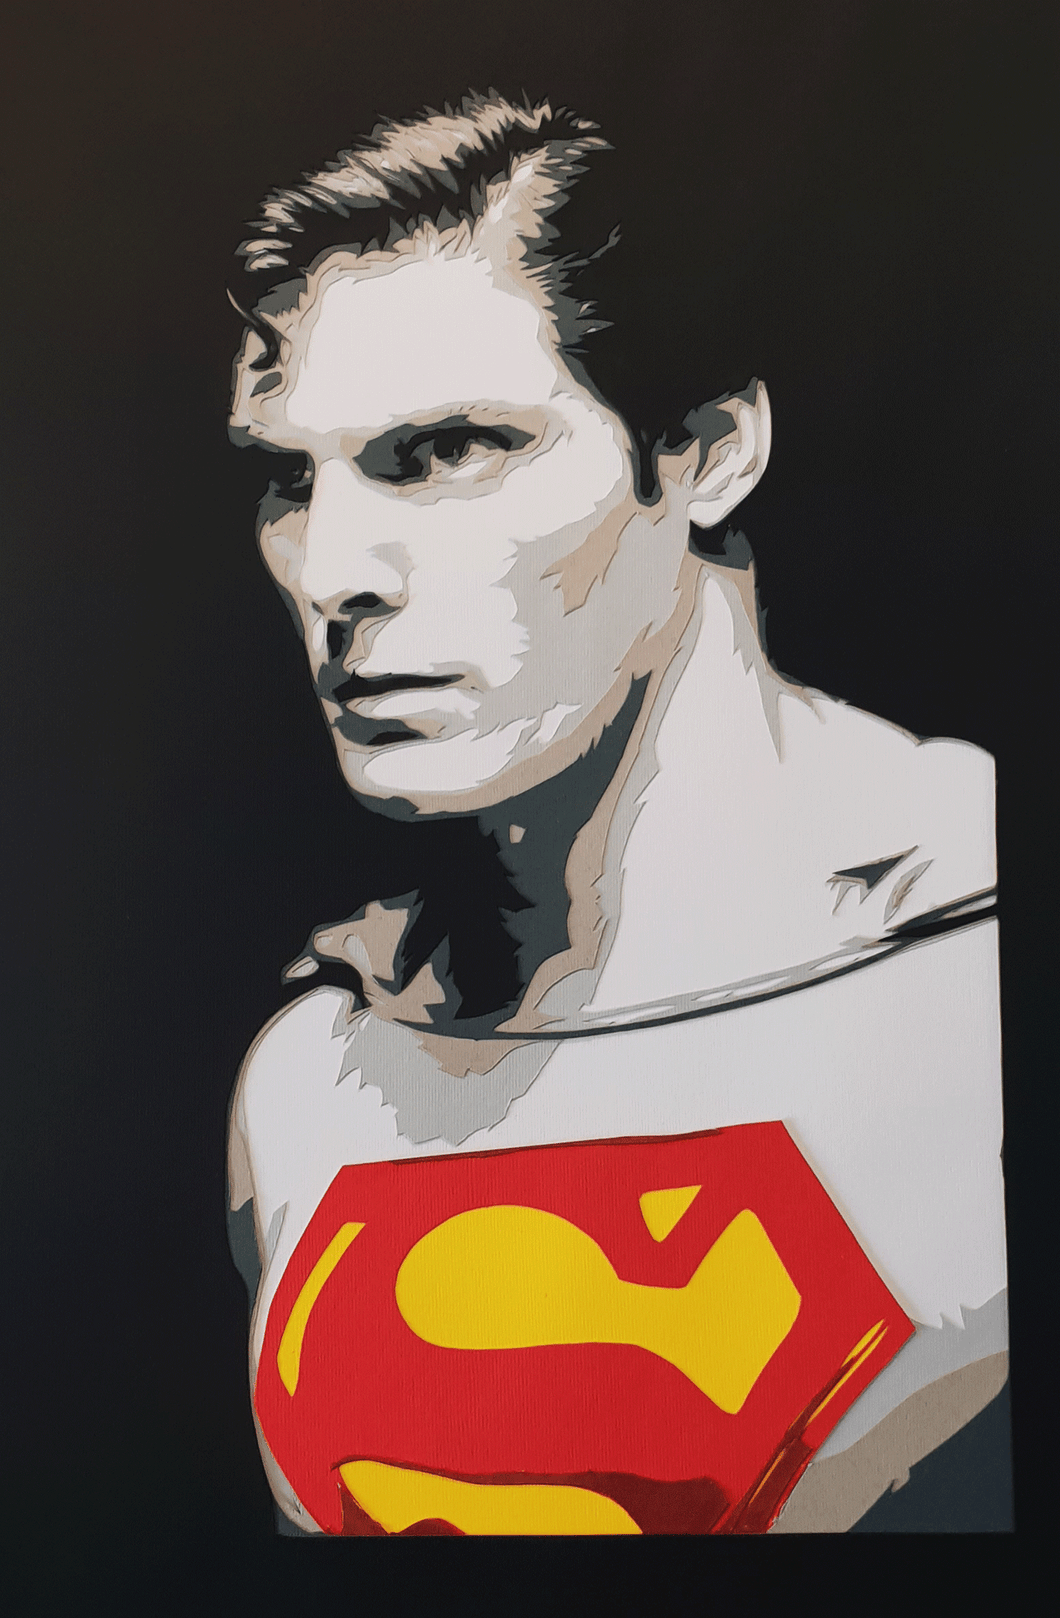 Christopher Reeve Superman by Rick Sharif - FRAMED [A3 Size (297 x 420 mm) (11.7 x 16.5 in) in a FRAME]